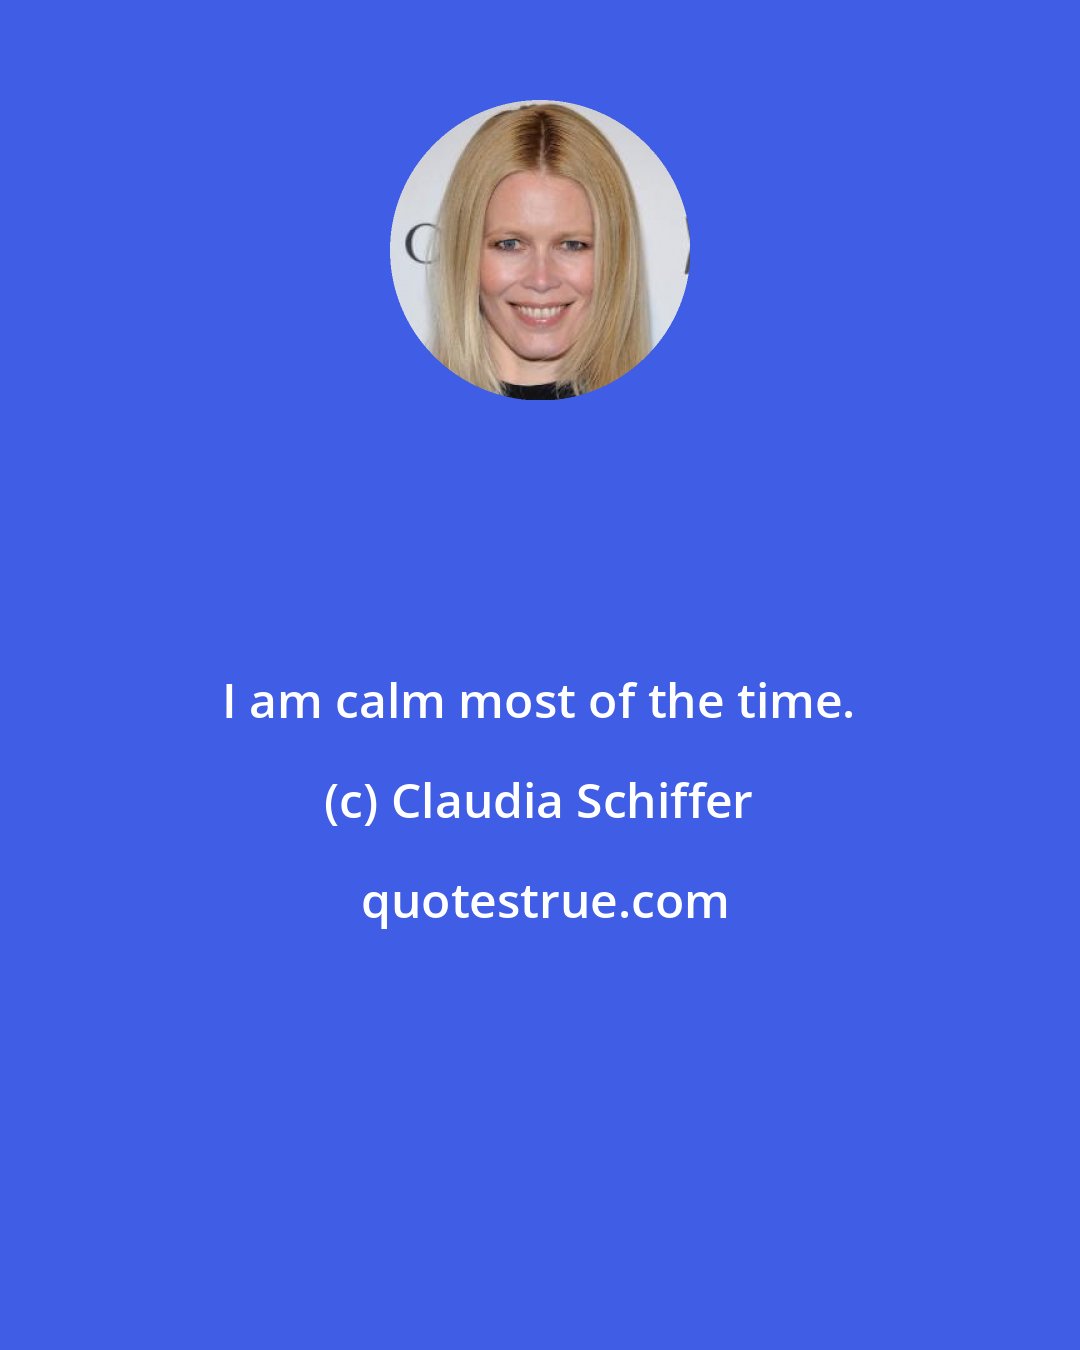 Claudia Schiffer: I am calm most of the time.